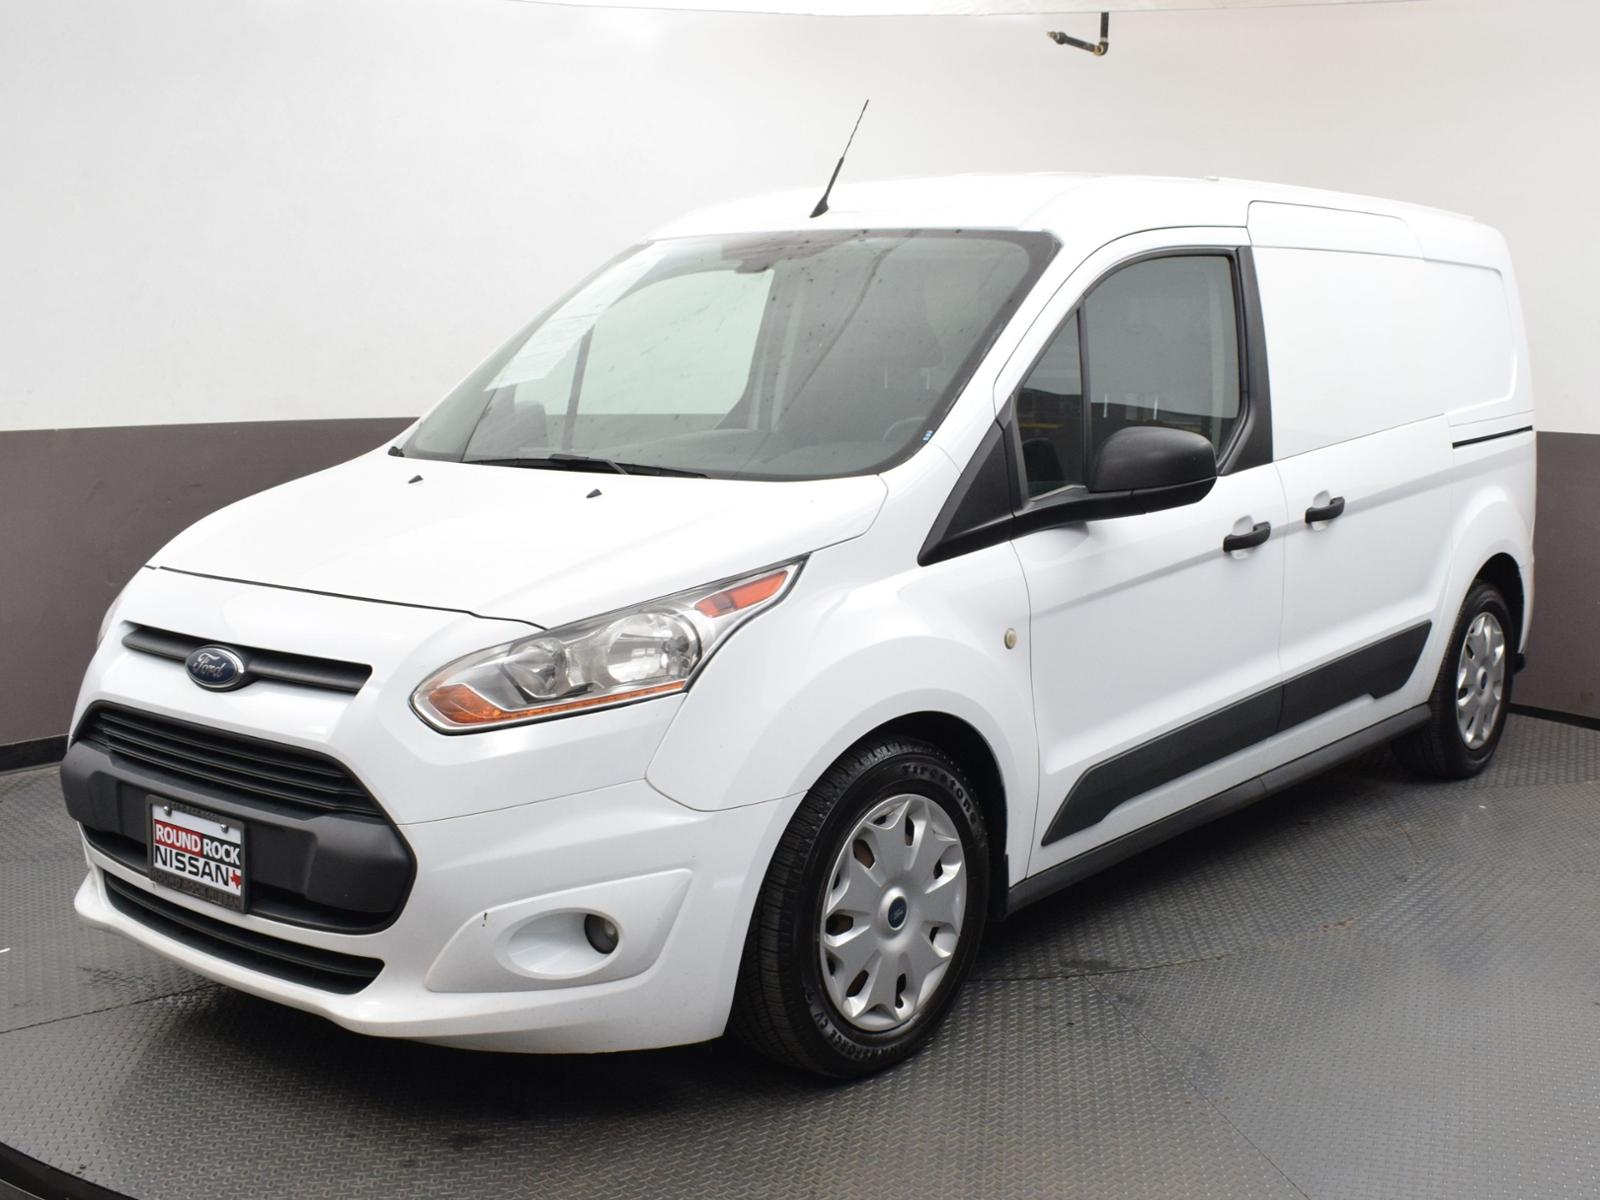 Pre-Owned 2017 Ford Transit Connect XLT LWB w/Rear Symmetrical Doors Mini- van, Cargo in Round Rock #H1301458 | Round Rock Nissan